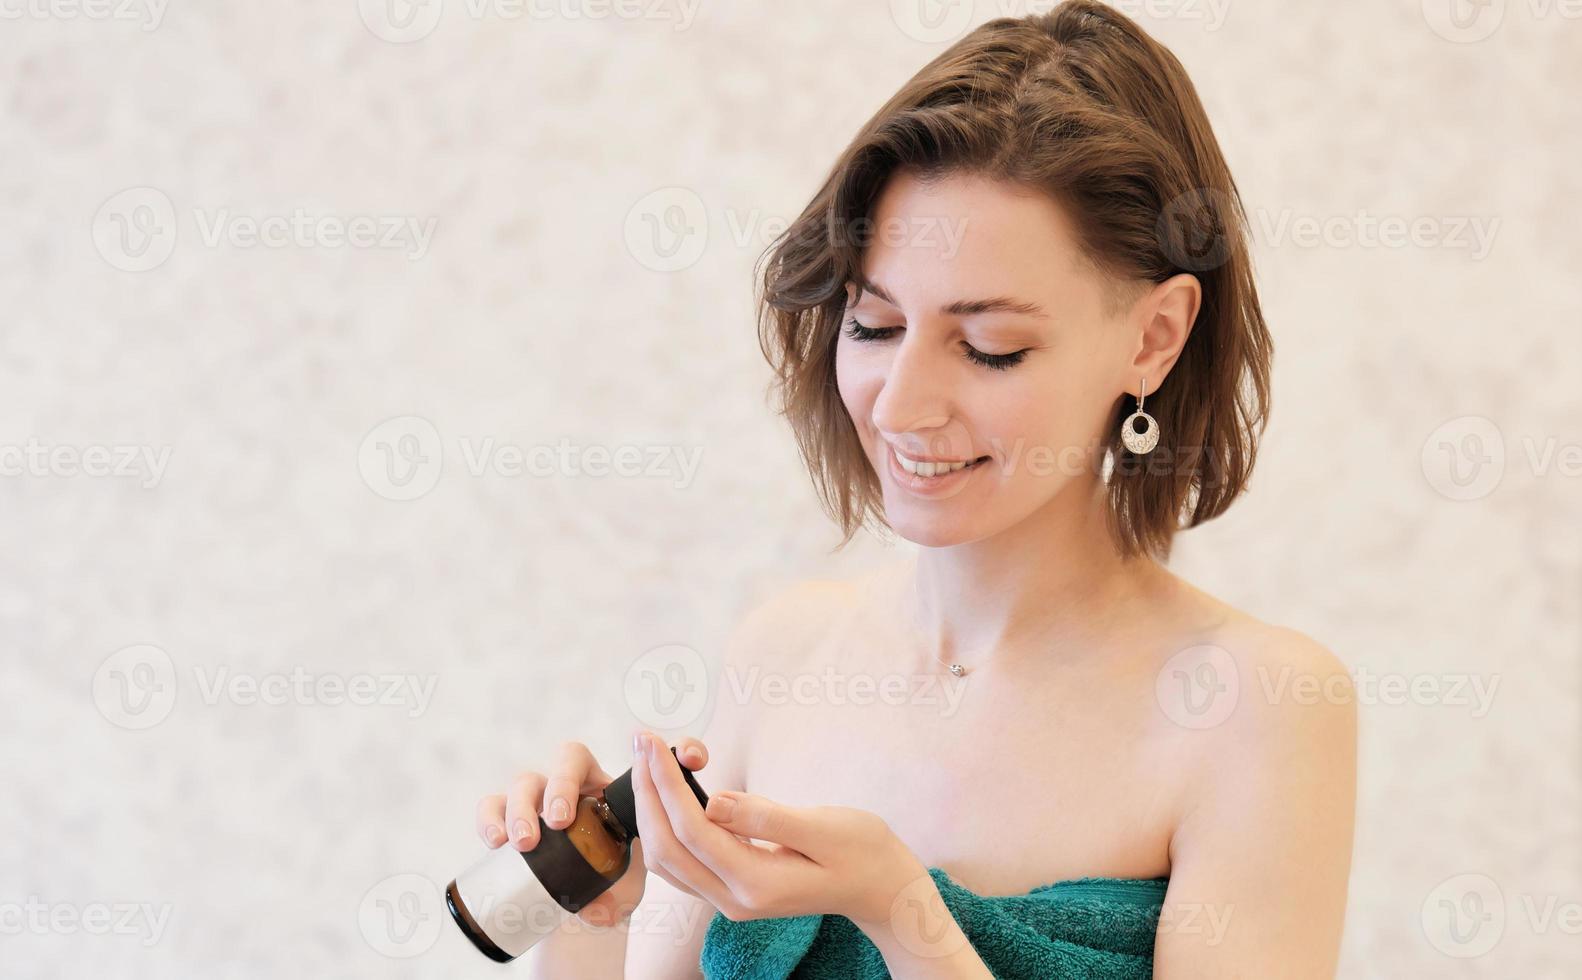 young woman using cosmetic lotion or cream. body care product for perfect skin. woman wearing bath towel and applying moiturizer. beauty cosmetic unbranded bottle photo